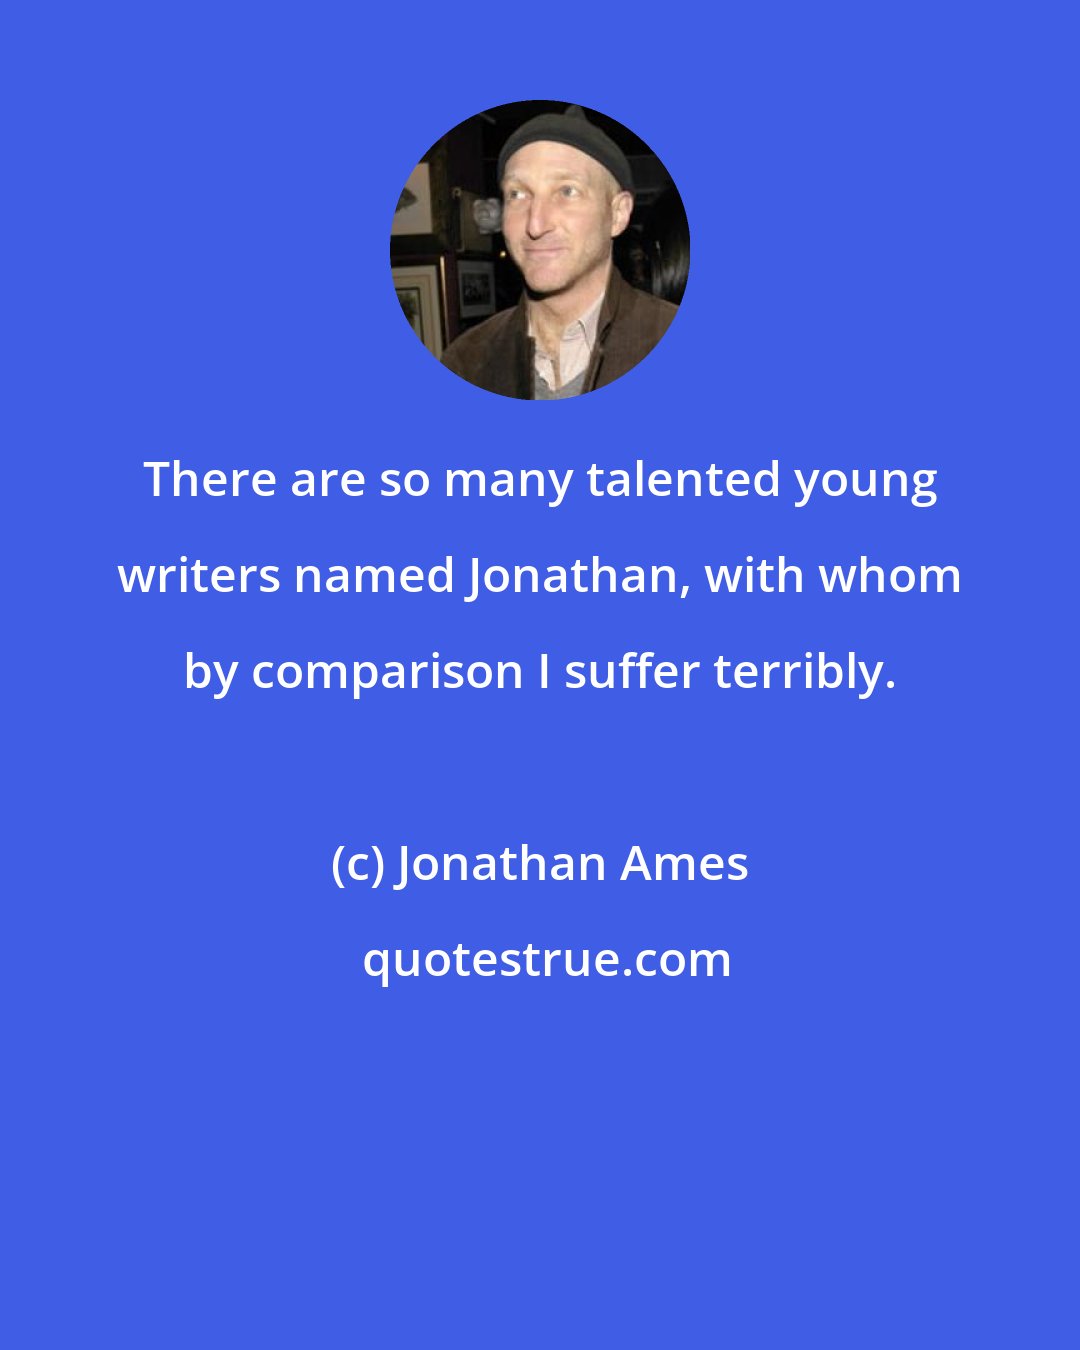 Jonathan Ames: There are so many talented young writers named Jonathan, with whom by comparison I suffer terribly.